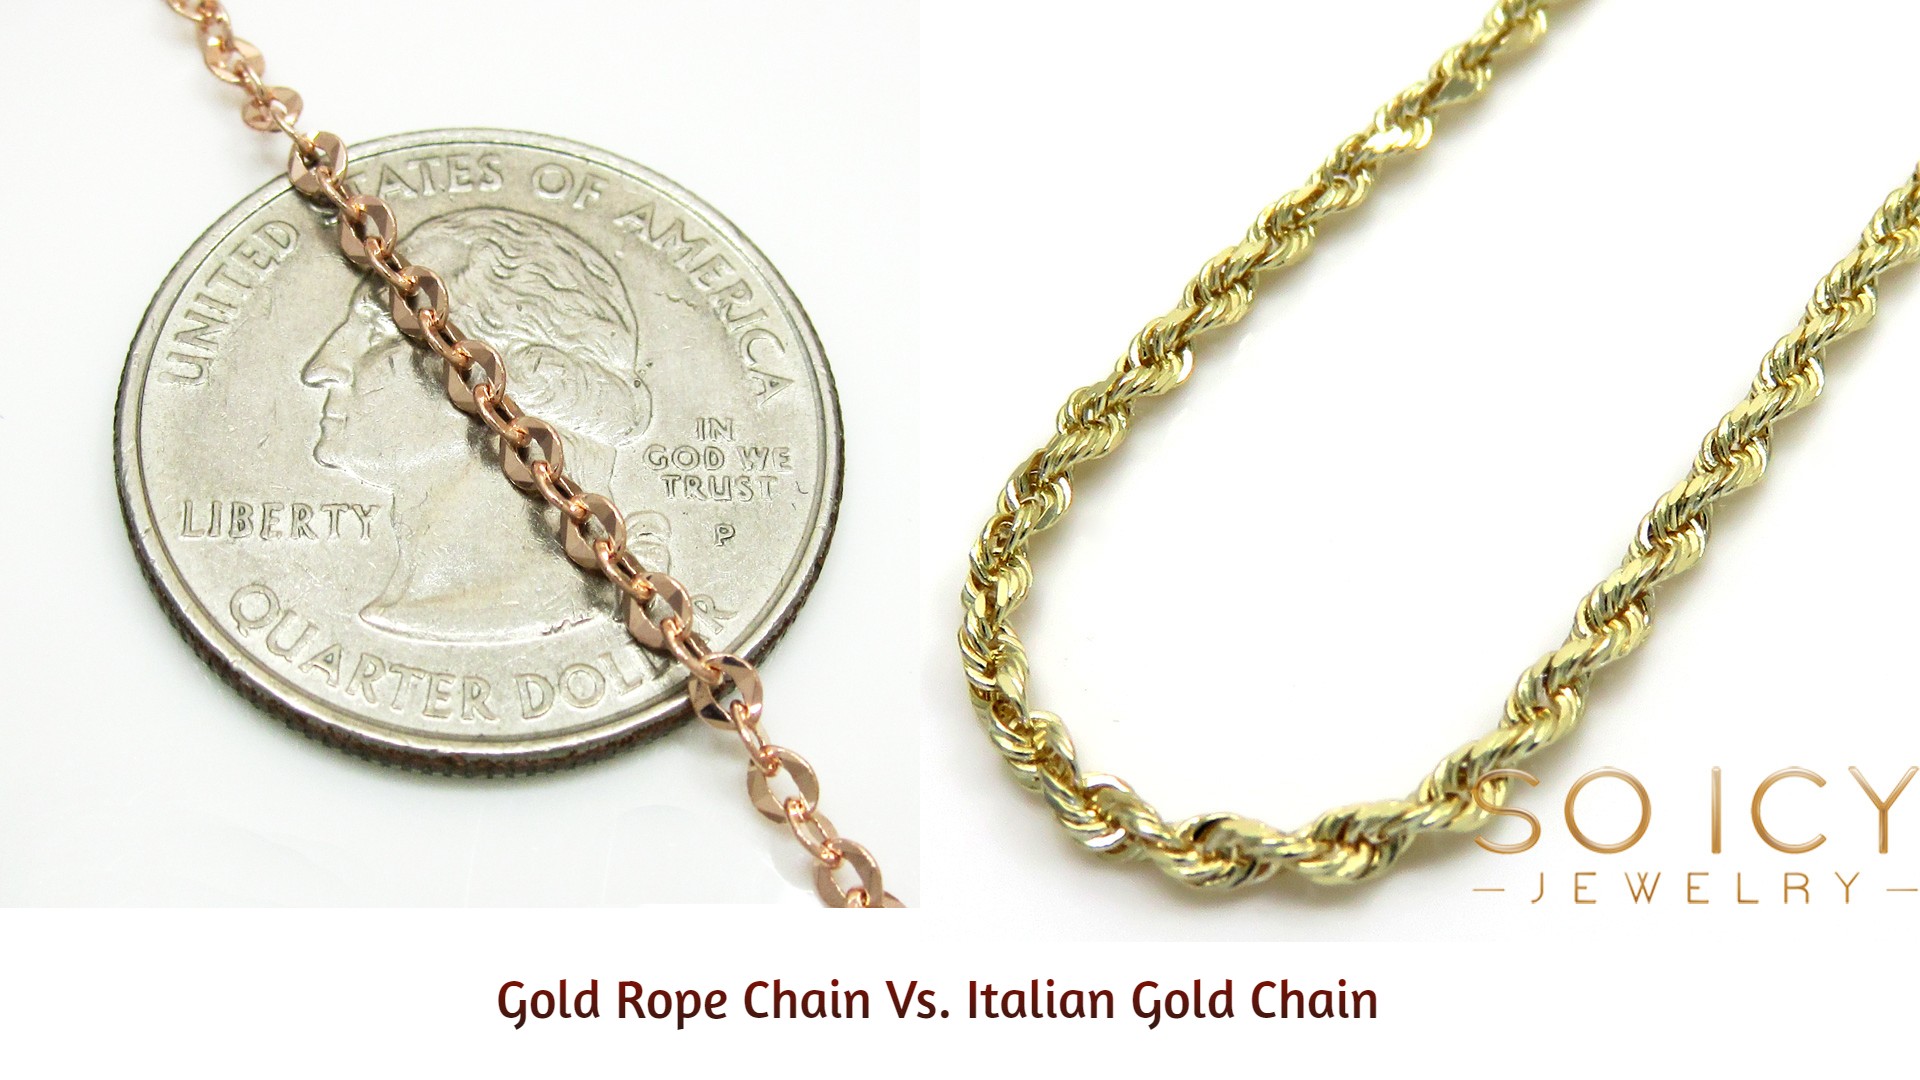 How is the 14k gold rope chain different from the 14k Italian gold chain?